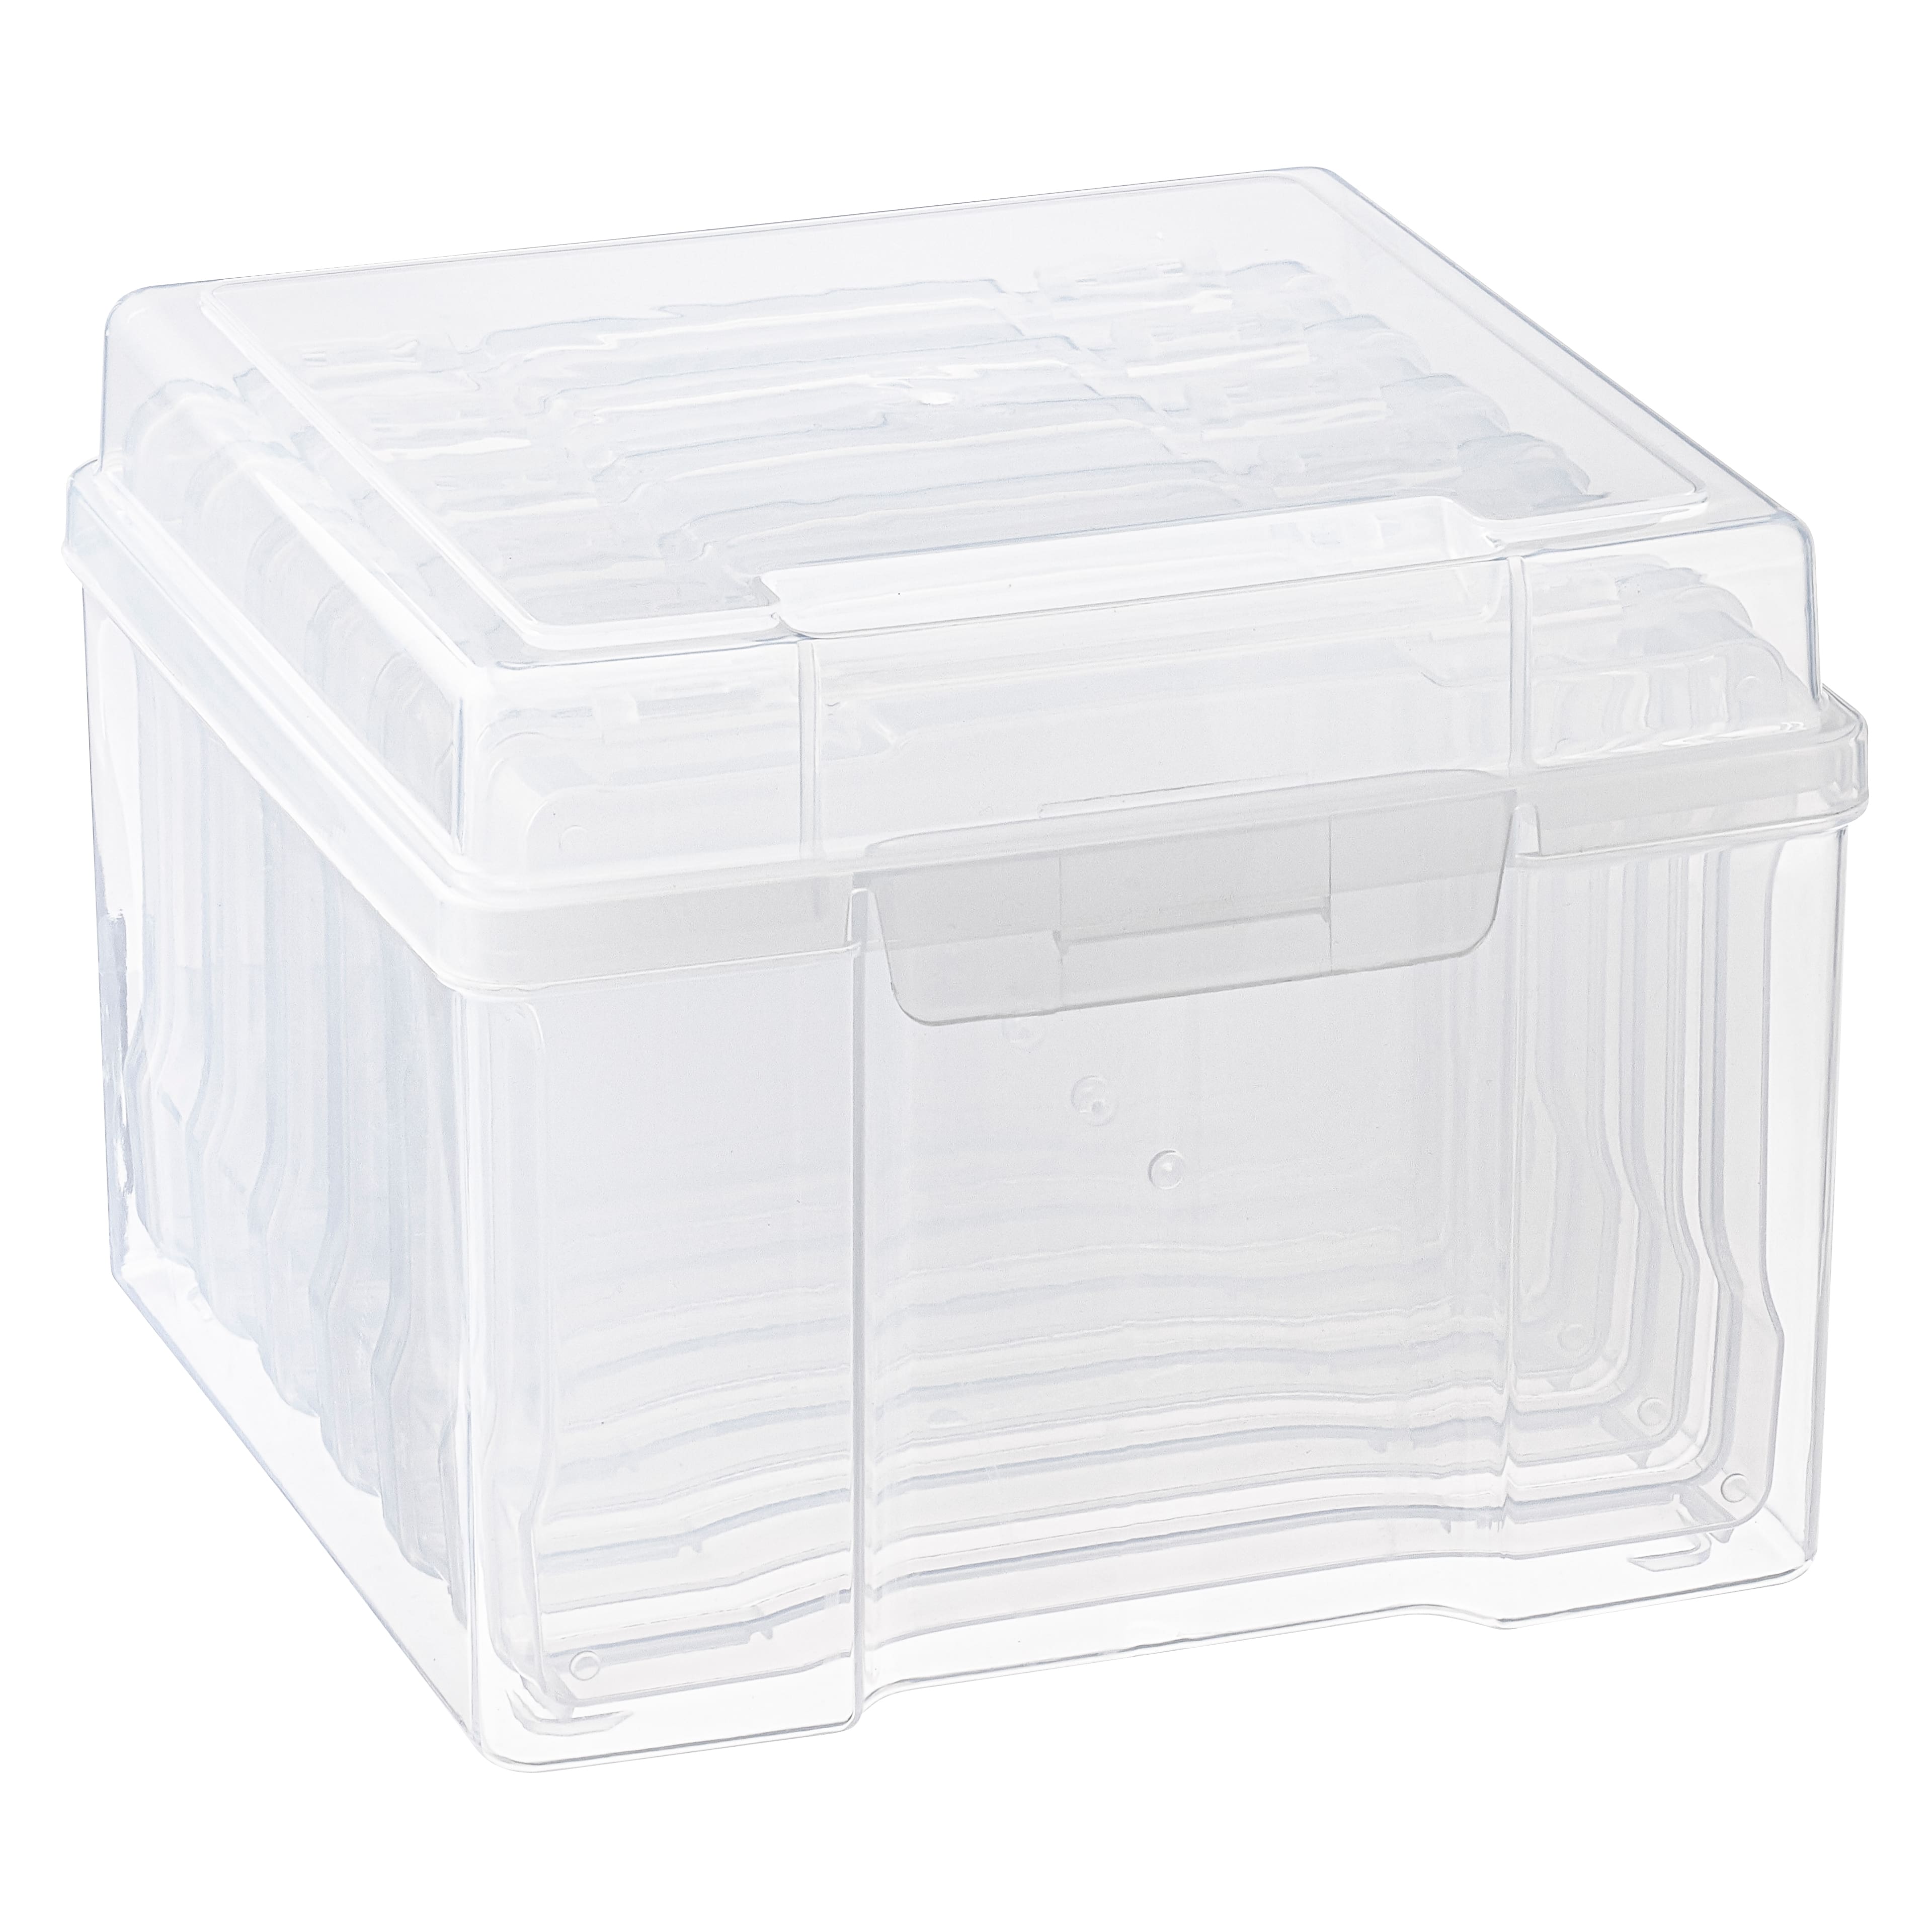 Cart Bins 2ct. & 1 Cart Divider Bin by Simply Tidy Clips on Your